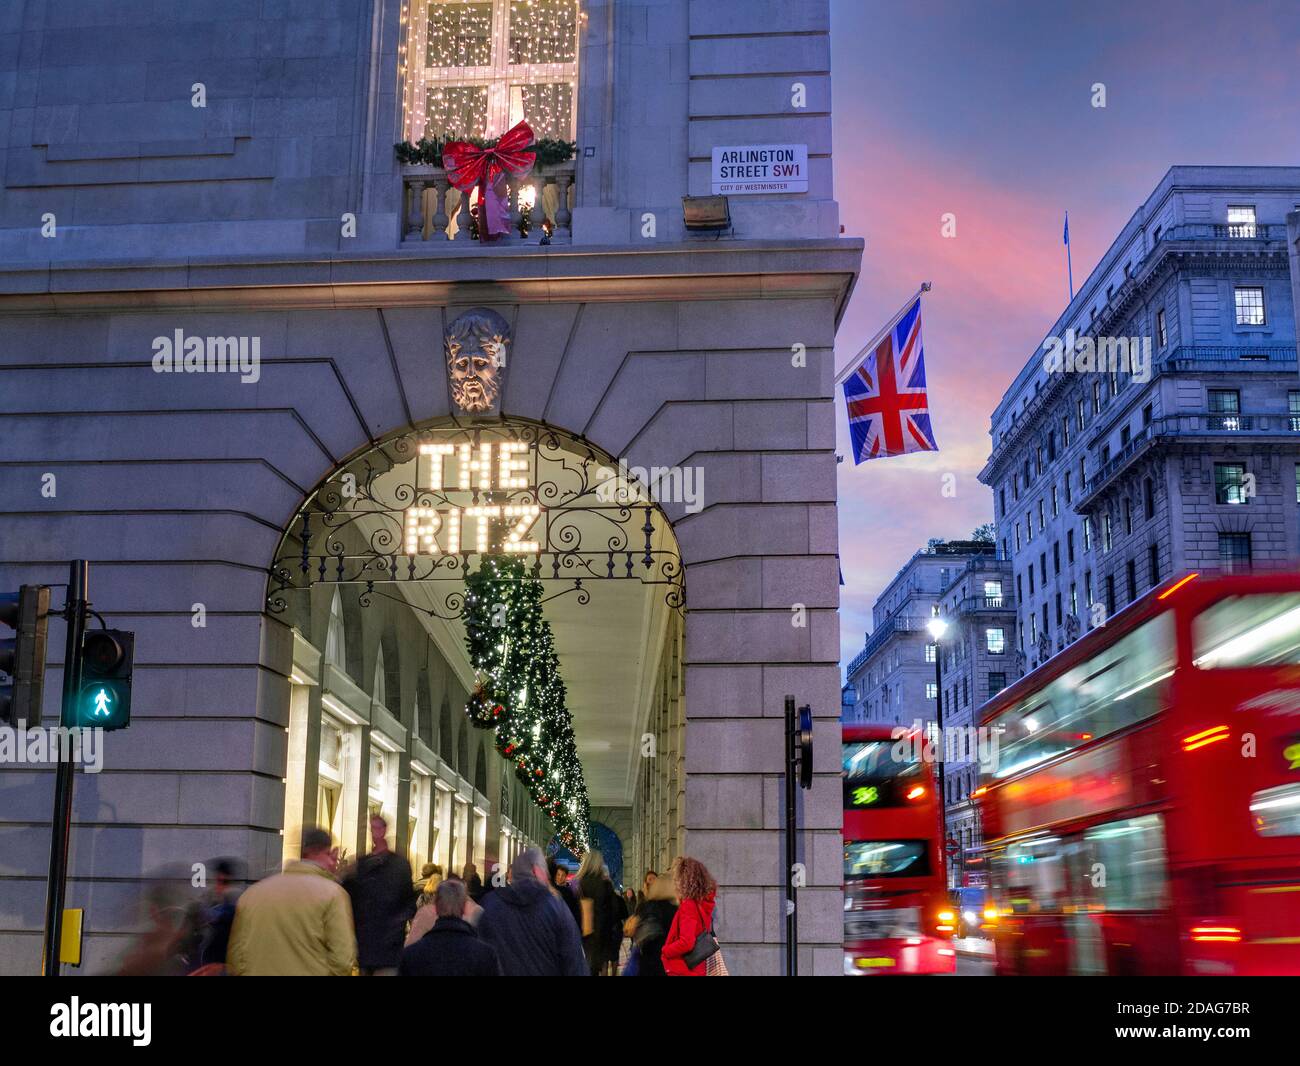 LONDON CHRISTMAS CROWDS The Ritz Hotel at winter busy festive season, evening night lights ‘The Ritz’ sign illuminated, with a Union Jack flag, shoppers and passing blurred London red buses Arlington Street Piccadilly London UK Stock Photo